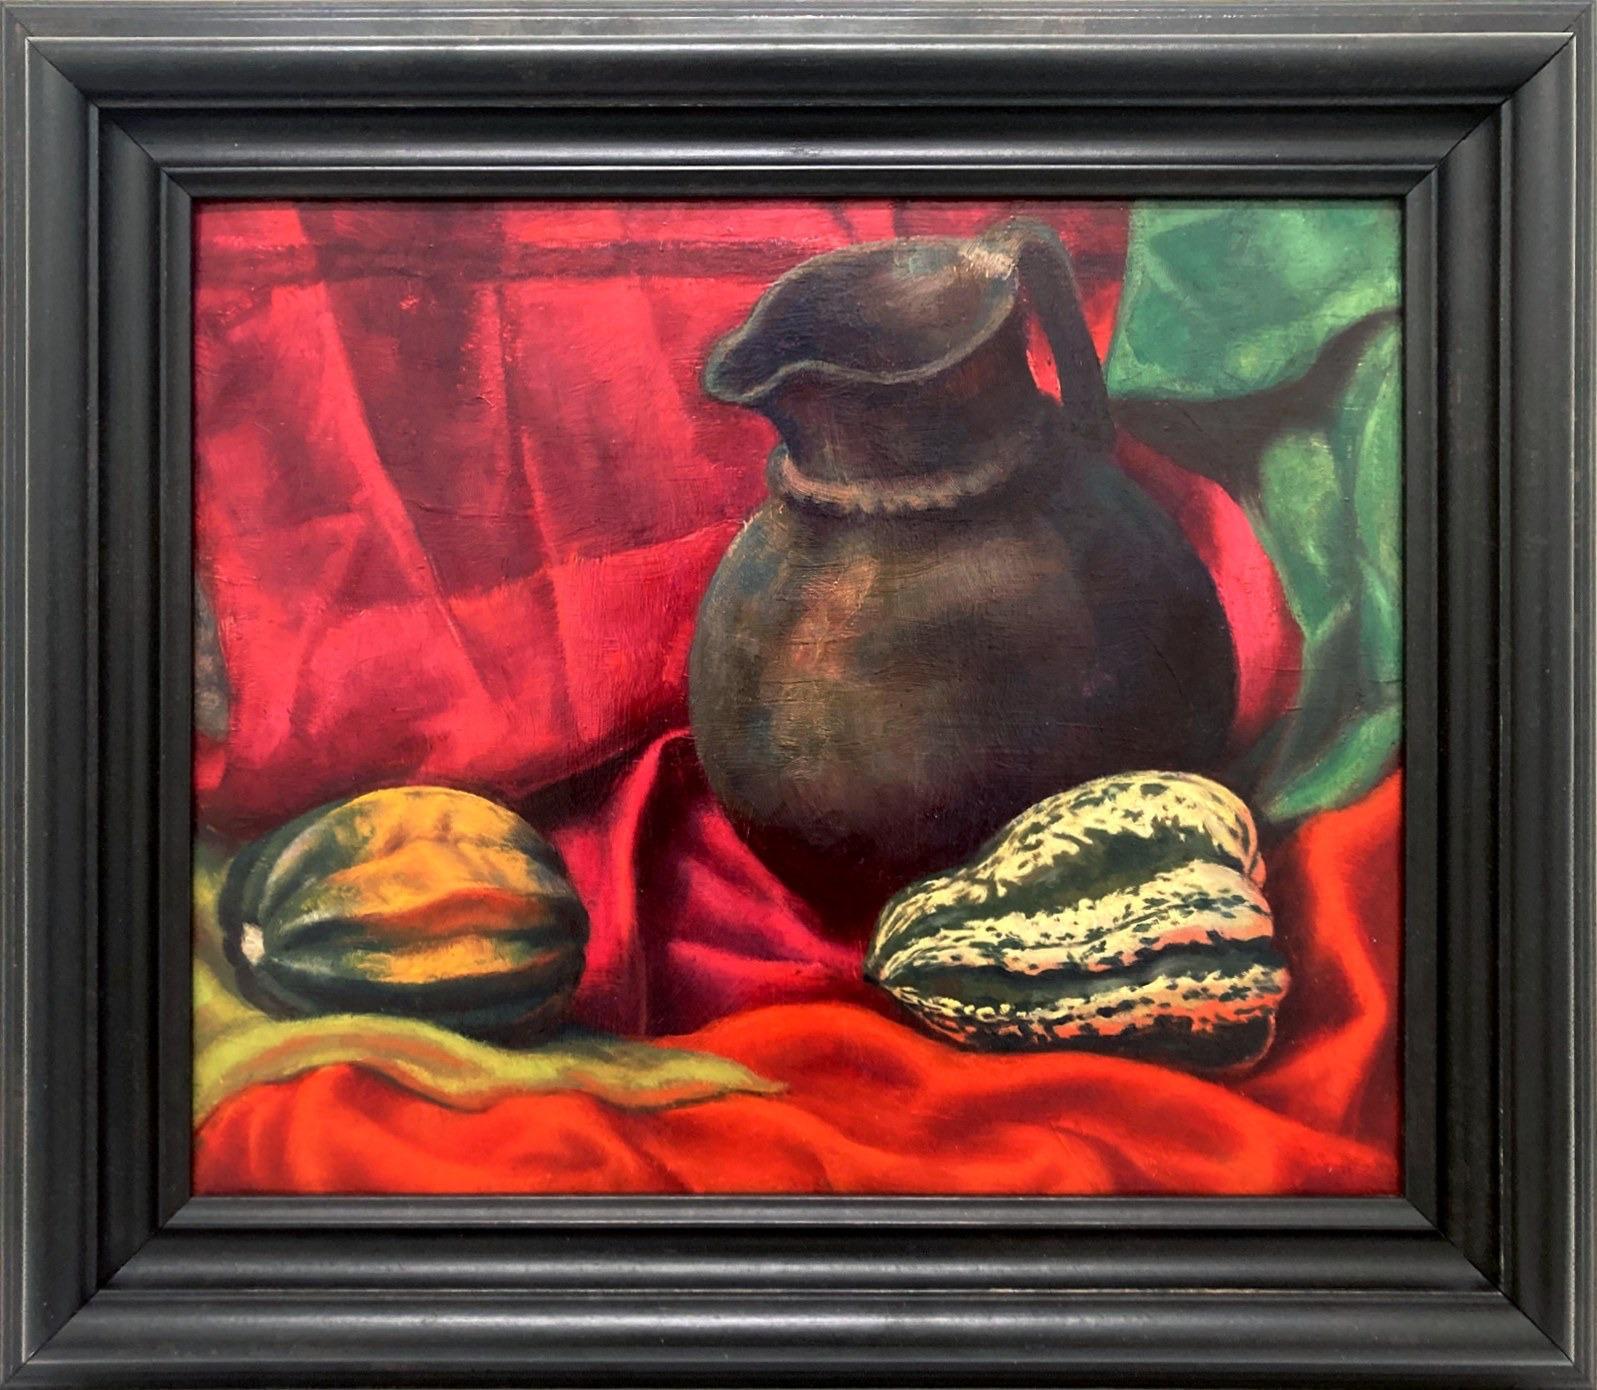 Untitled (Still Life with Pitcher and Squash) - Painting by Harold Haydon